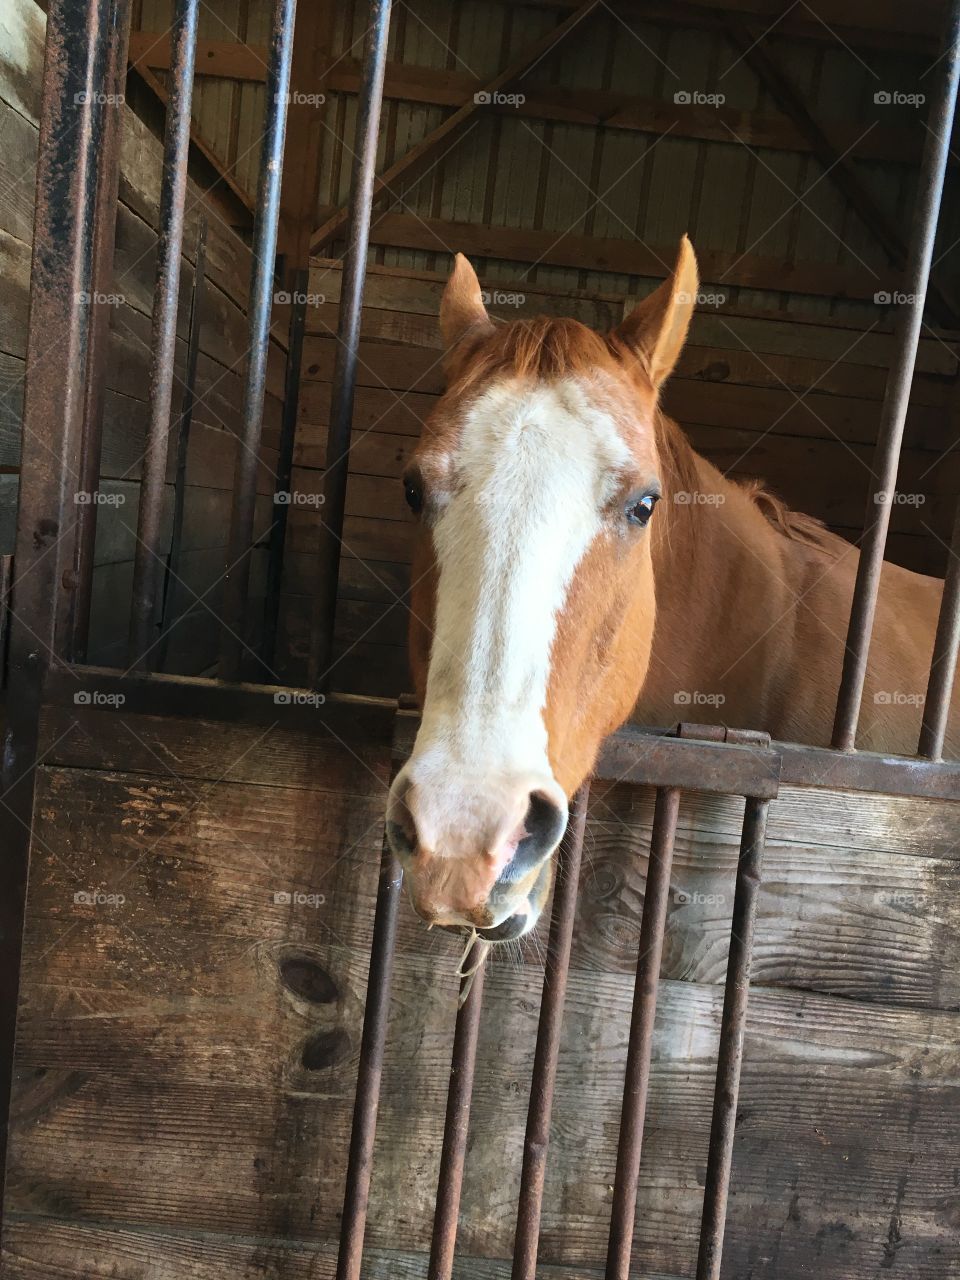 Ernie, a quarter horse gelding watching me over his stall door hoping I’ll give him a treat. 